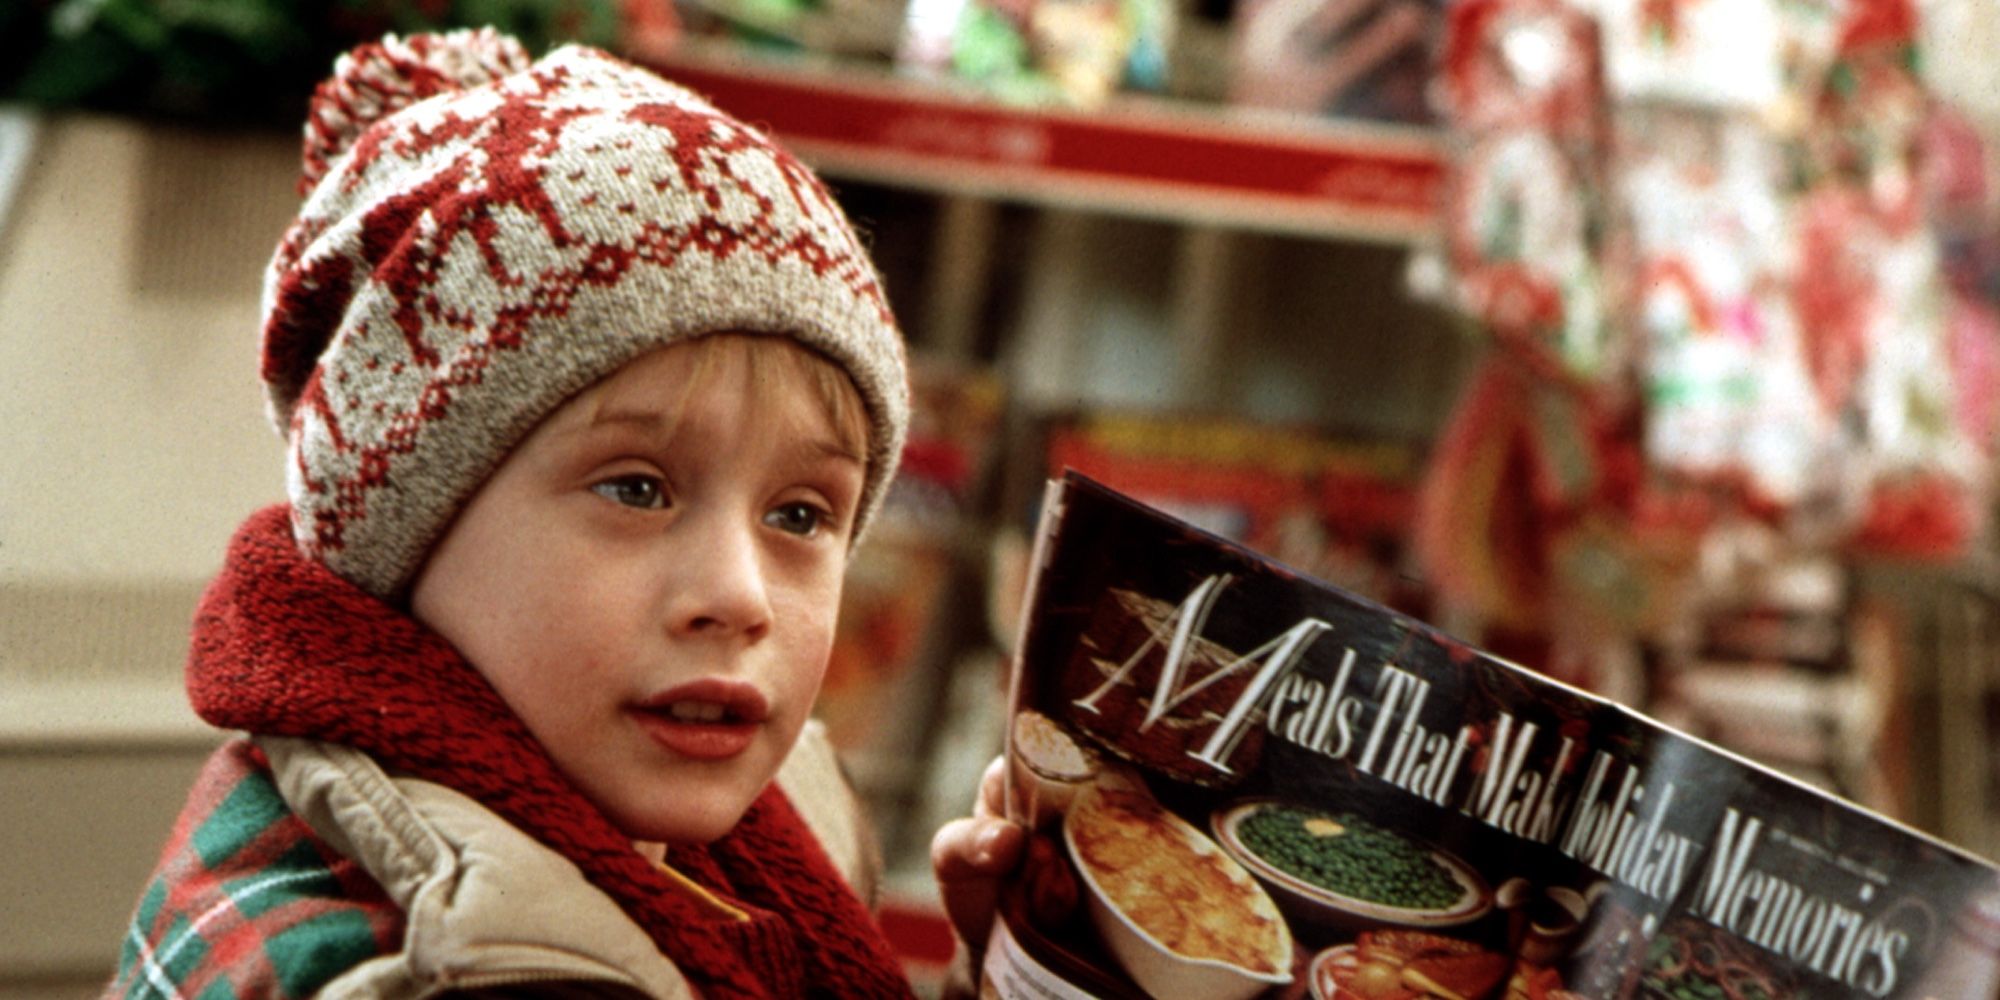 Home Alone Cast & Crew Where Are They Now